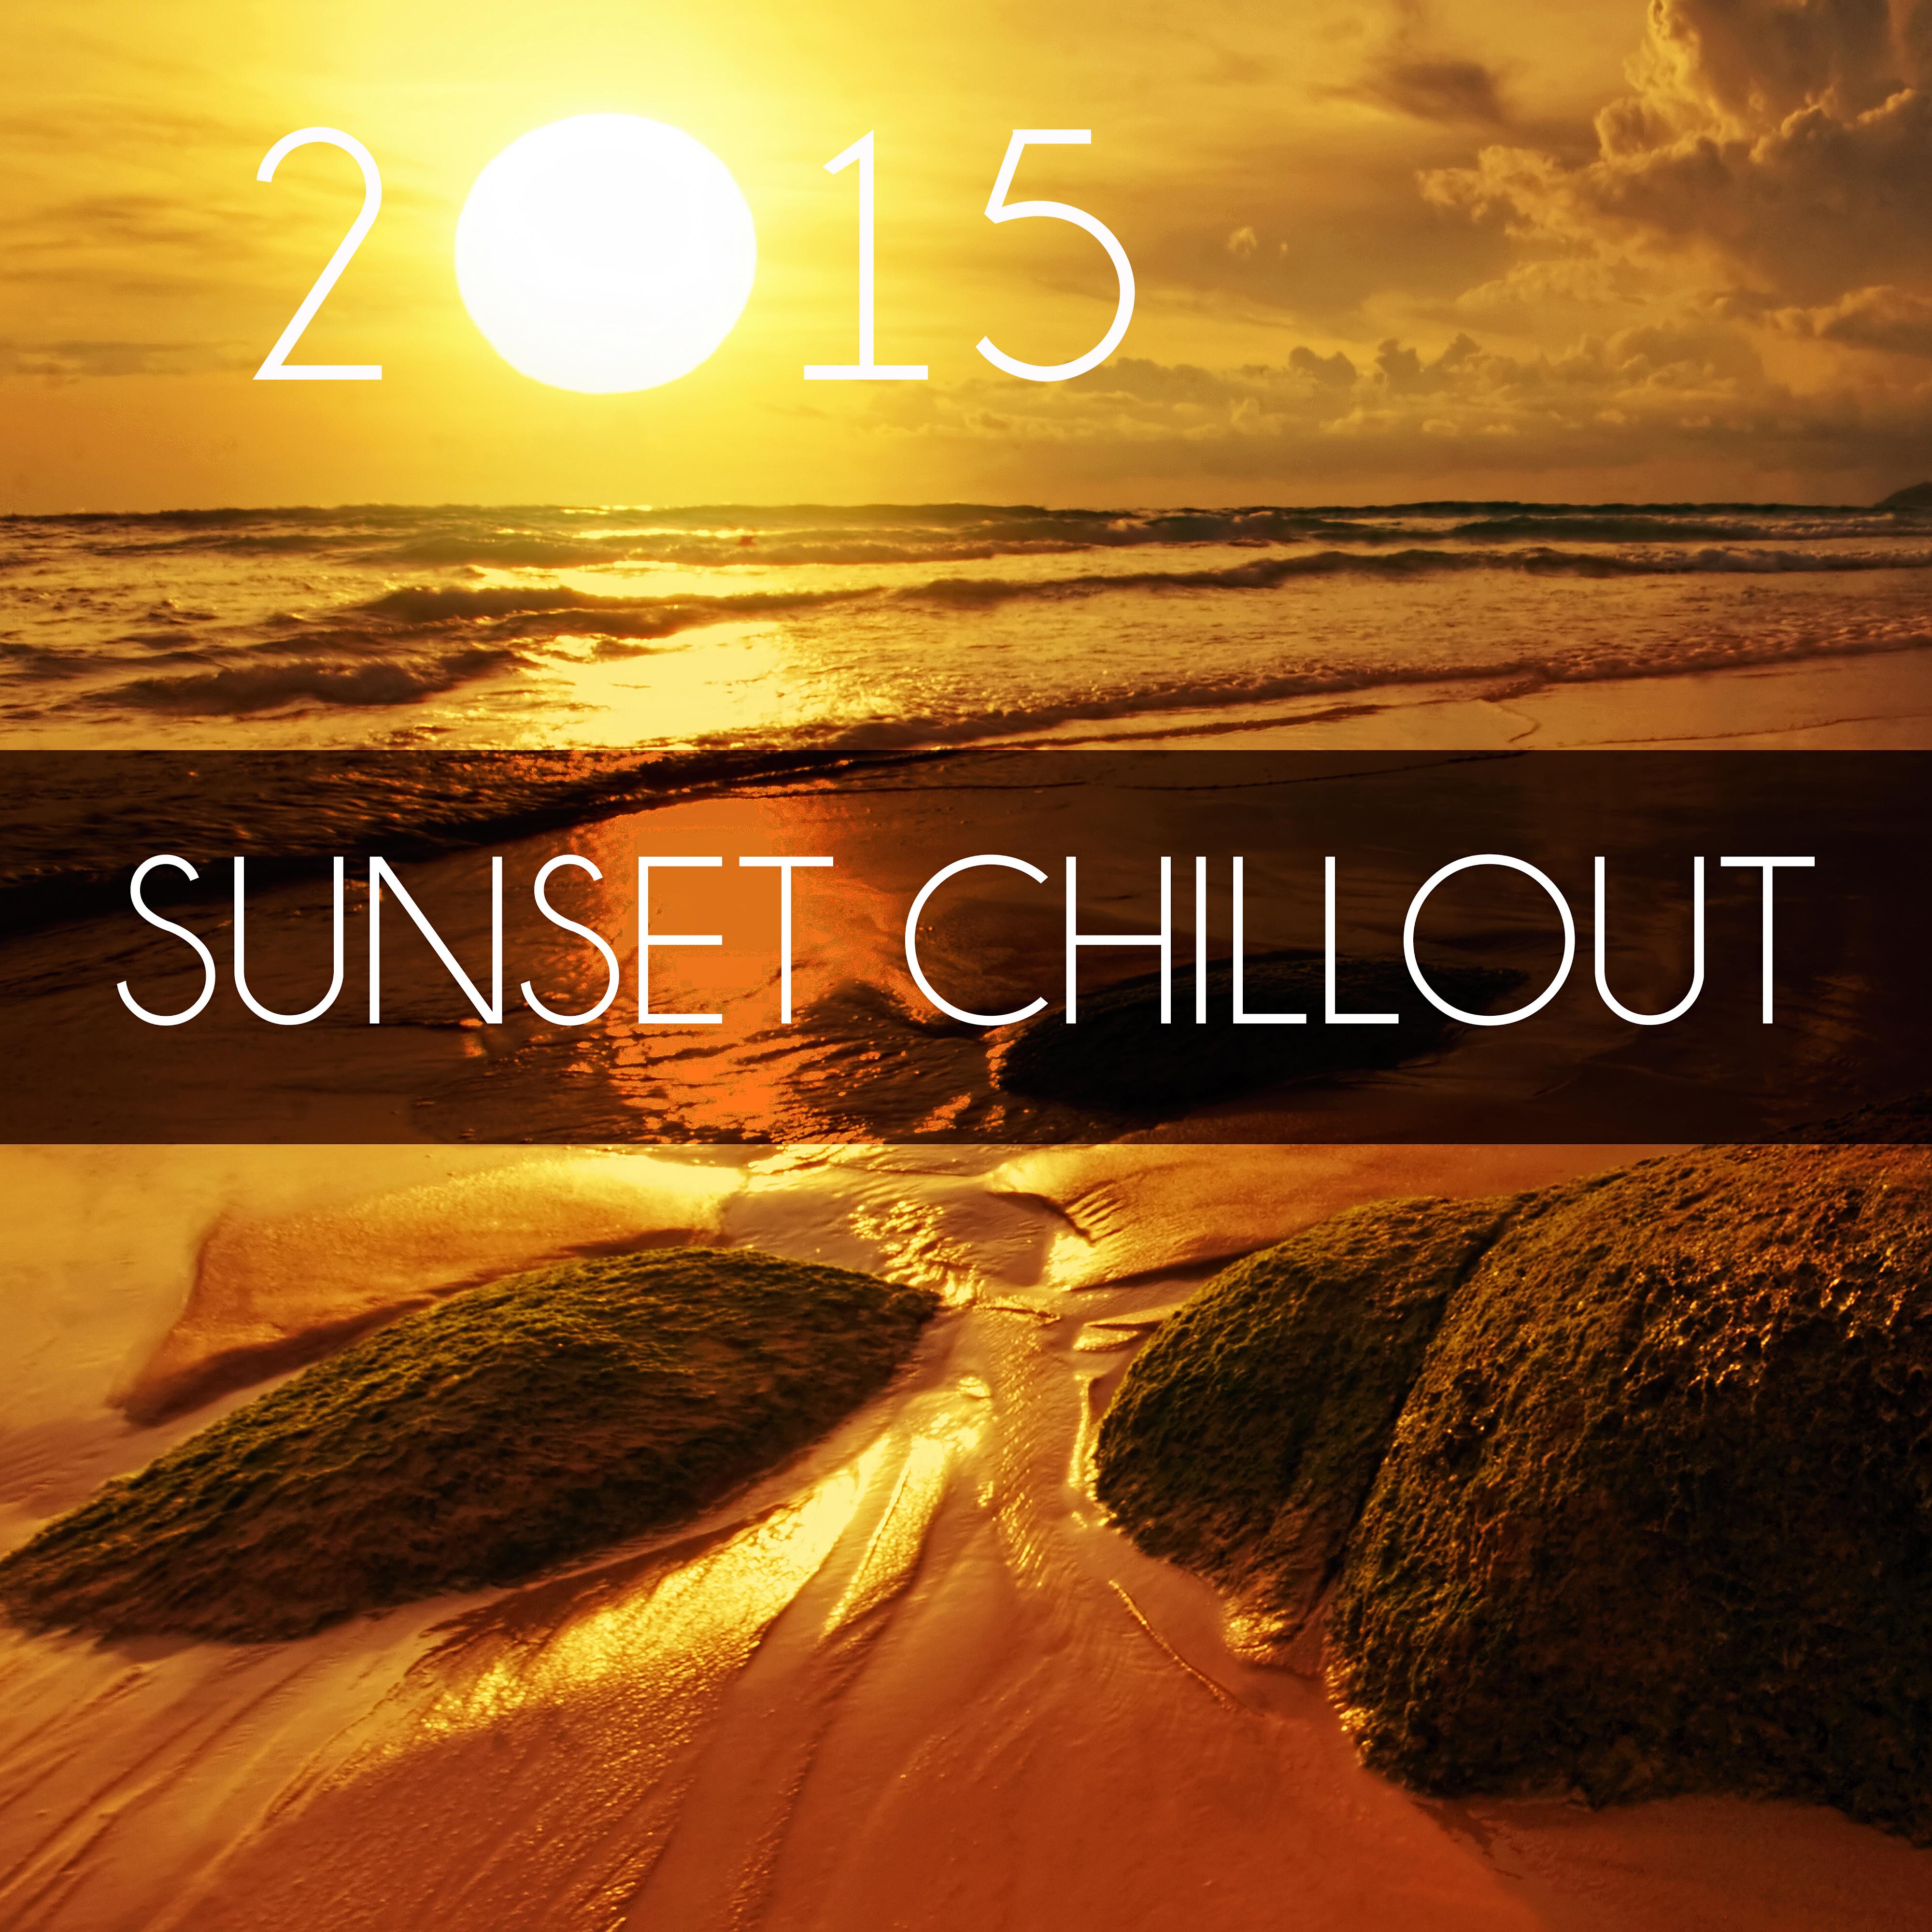 Sunset Chillout 2015  Summer Time, Just Relax, Easy Going, Well Being, Chill Out, Beach Party